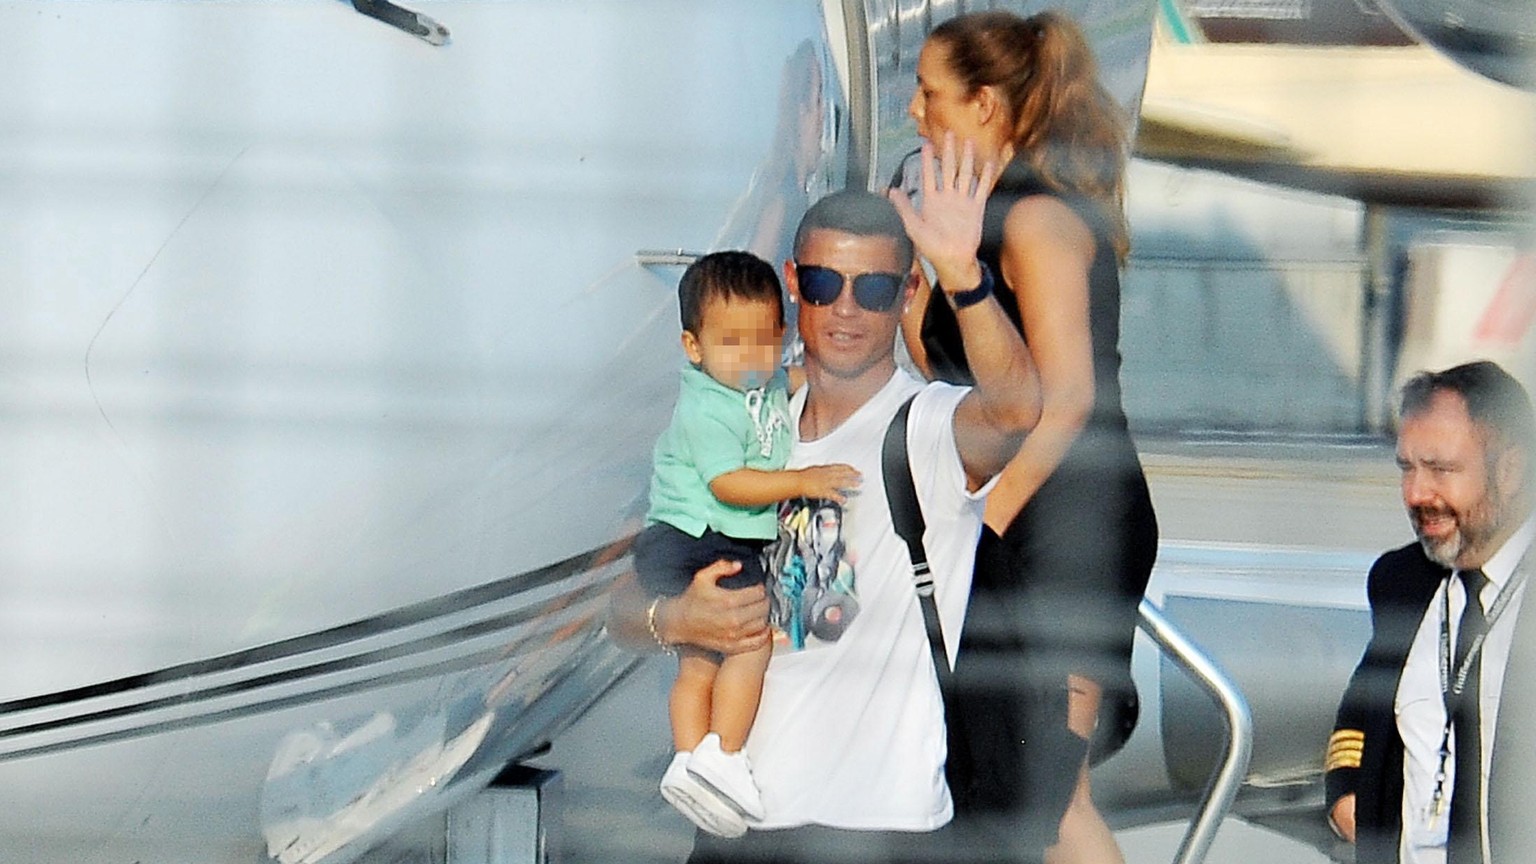 epa06917994 Juventus player Cristiano Ronaldo (with the youngest child) arrives at Caselle airport, Turin, Italy, 29 July 2018. EPA/Alessandro Di Marco